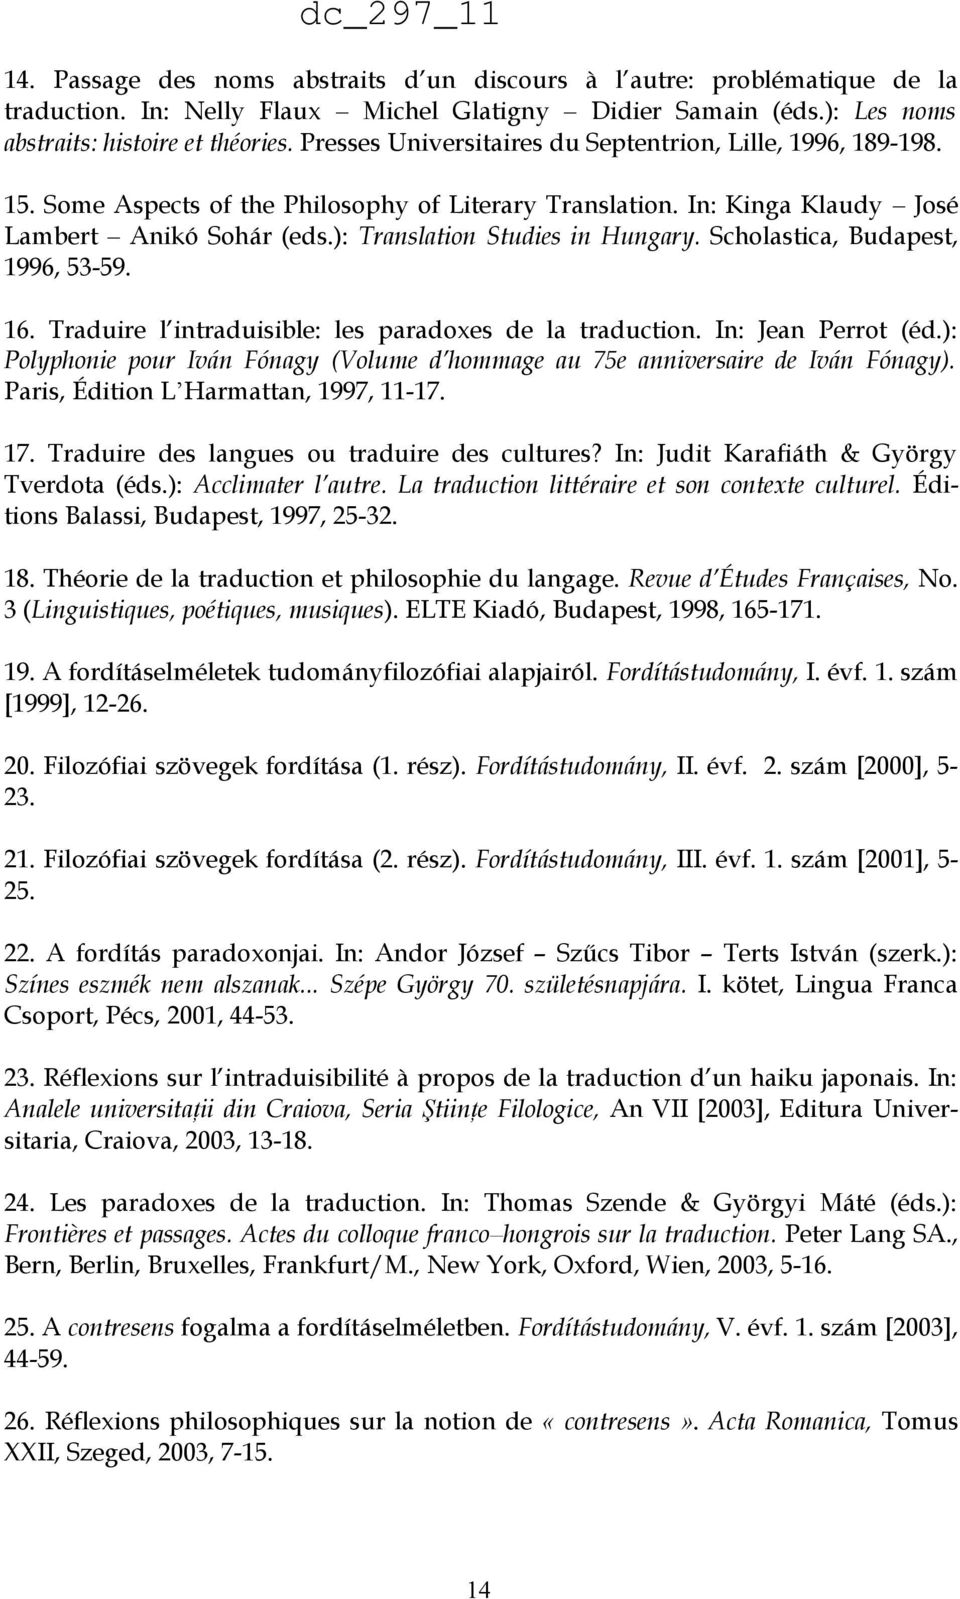 ): Translation Studies in Hungary. Scholastica, Budapest, 1996, 53-59. 16. Traduire l intraduisible: les paradoxes de la traduction. In: Jean Perrot (éd.